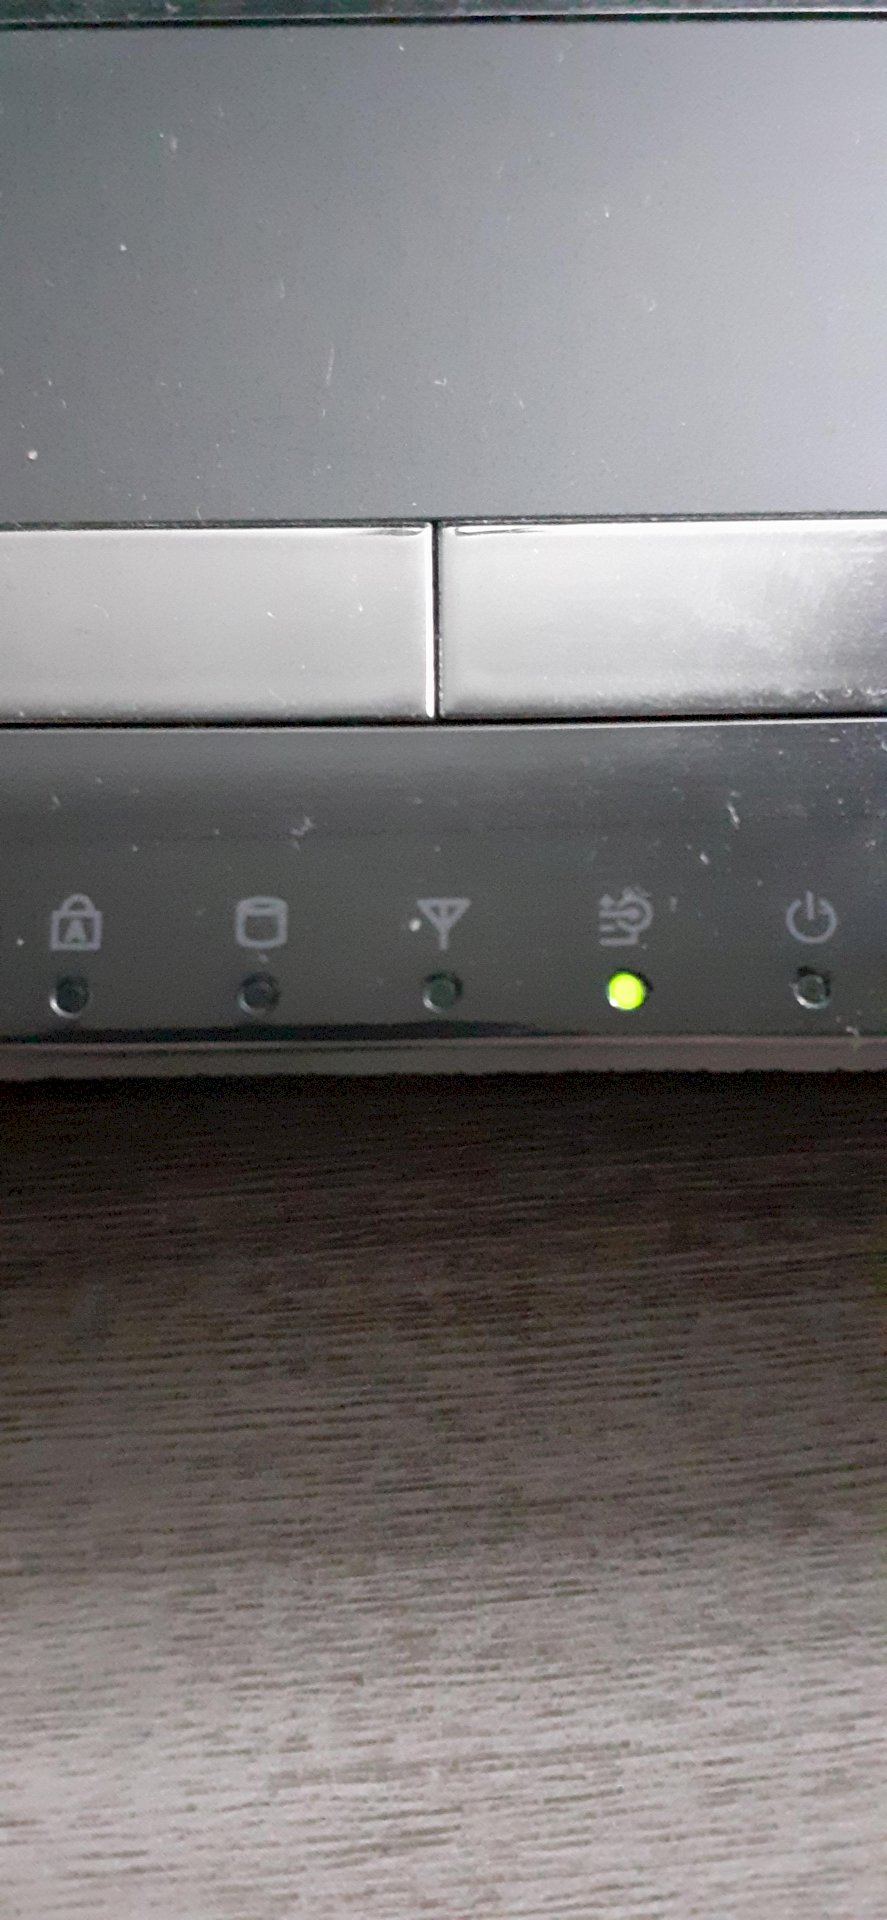 Why is my charging LED flashing on the Samsung laptop r540